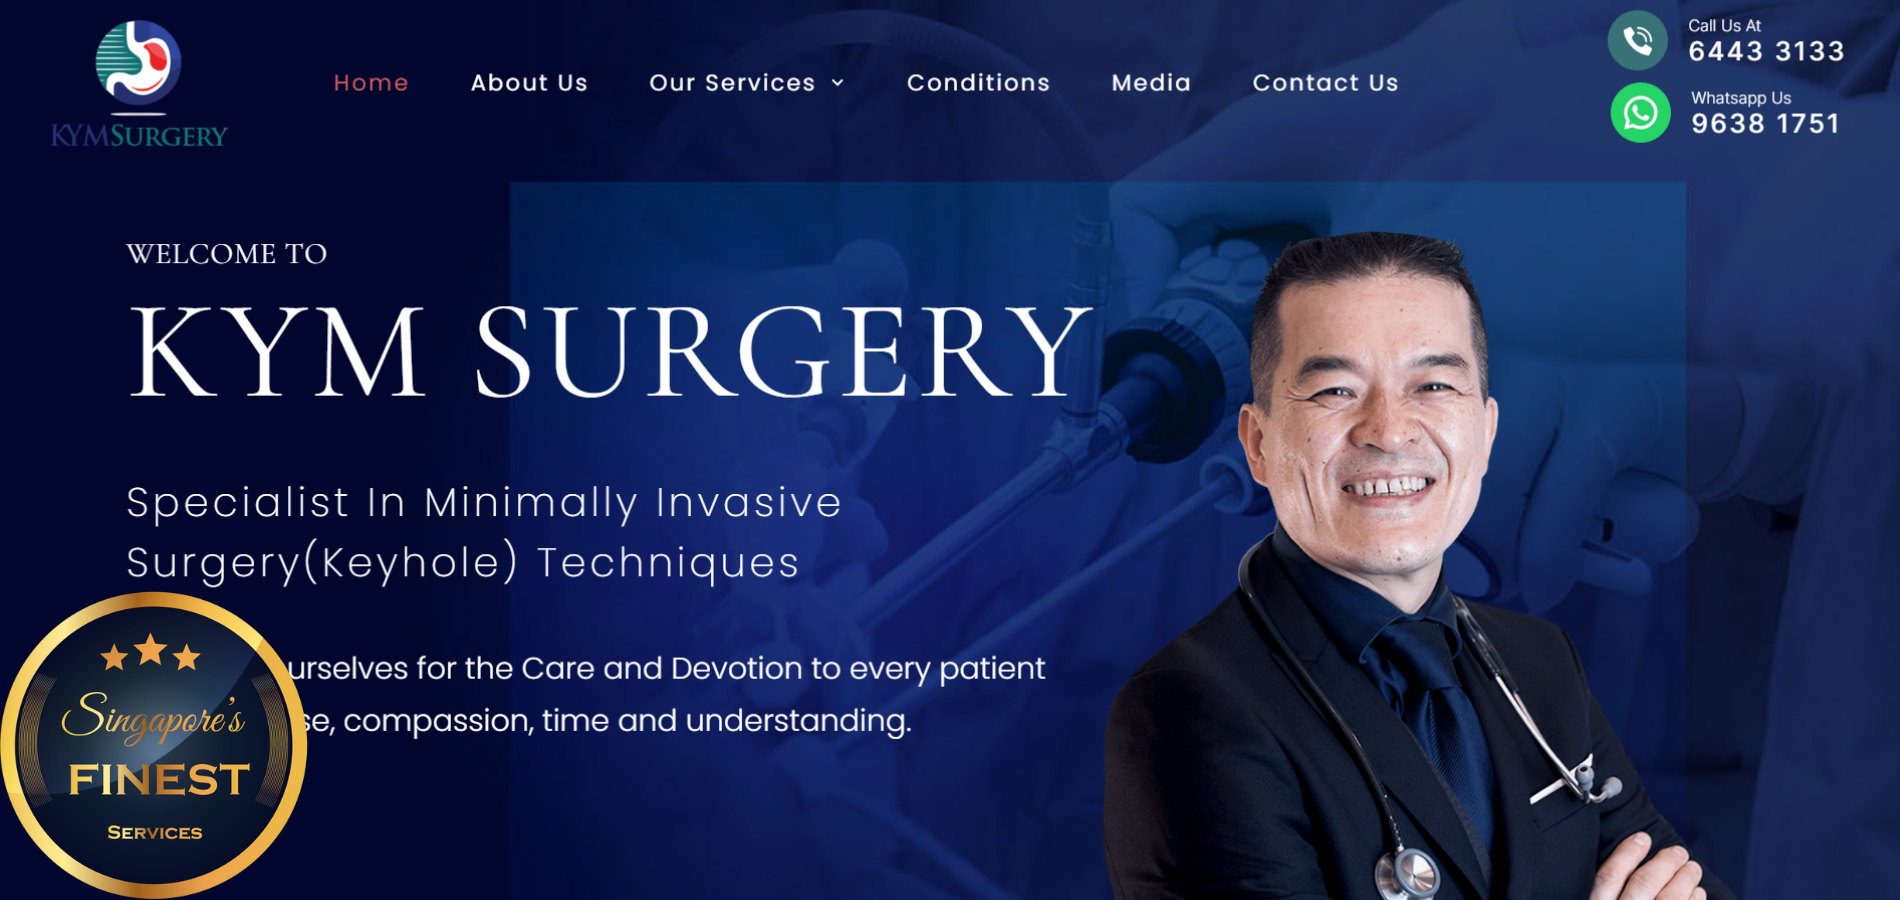 The Finest Clinics for Hernia Surgery in Singapore